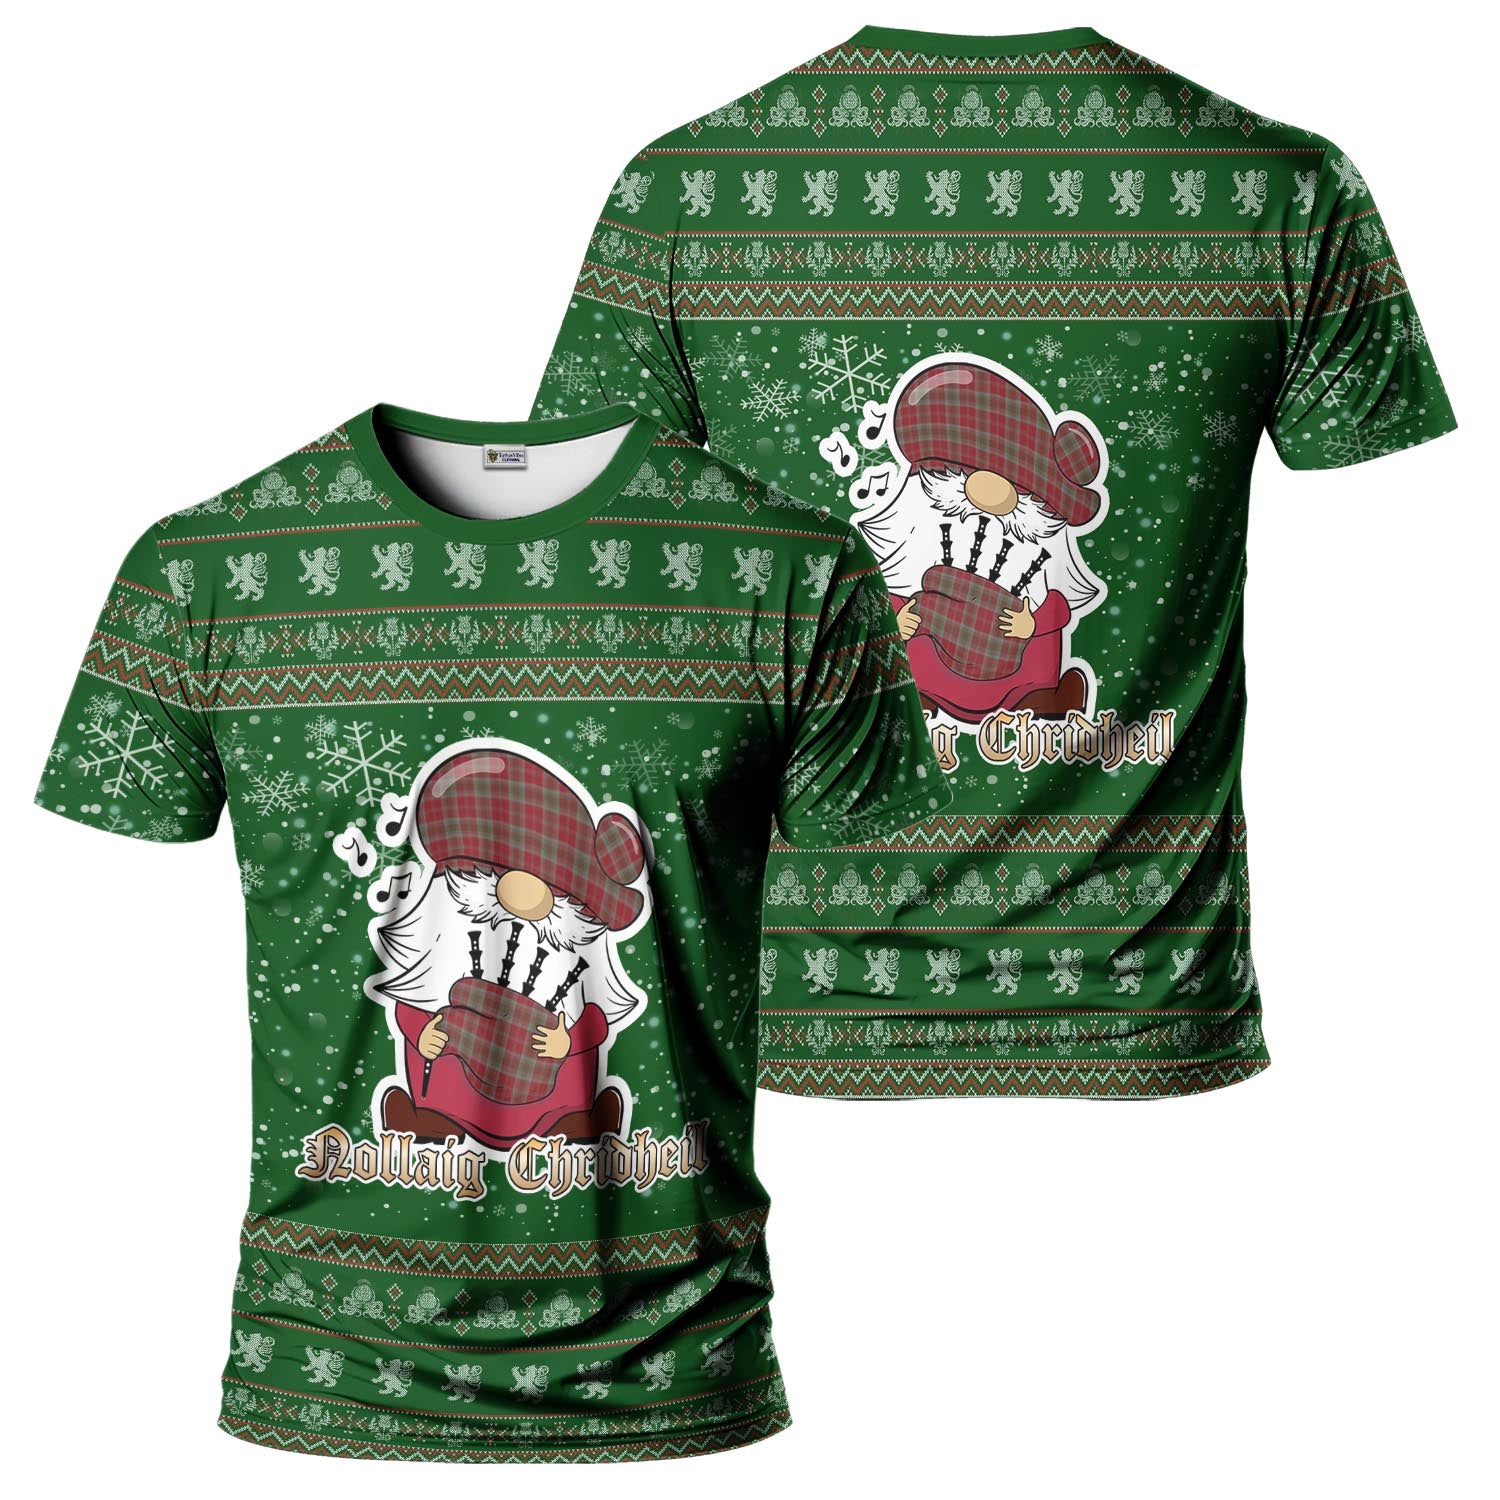 Lindsay Weathered Clan Christmas Family T-Shirt with Funny Gnome Playing Bagpipes Men's Shirt Green - Tartanvibesclothing